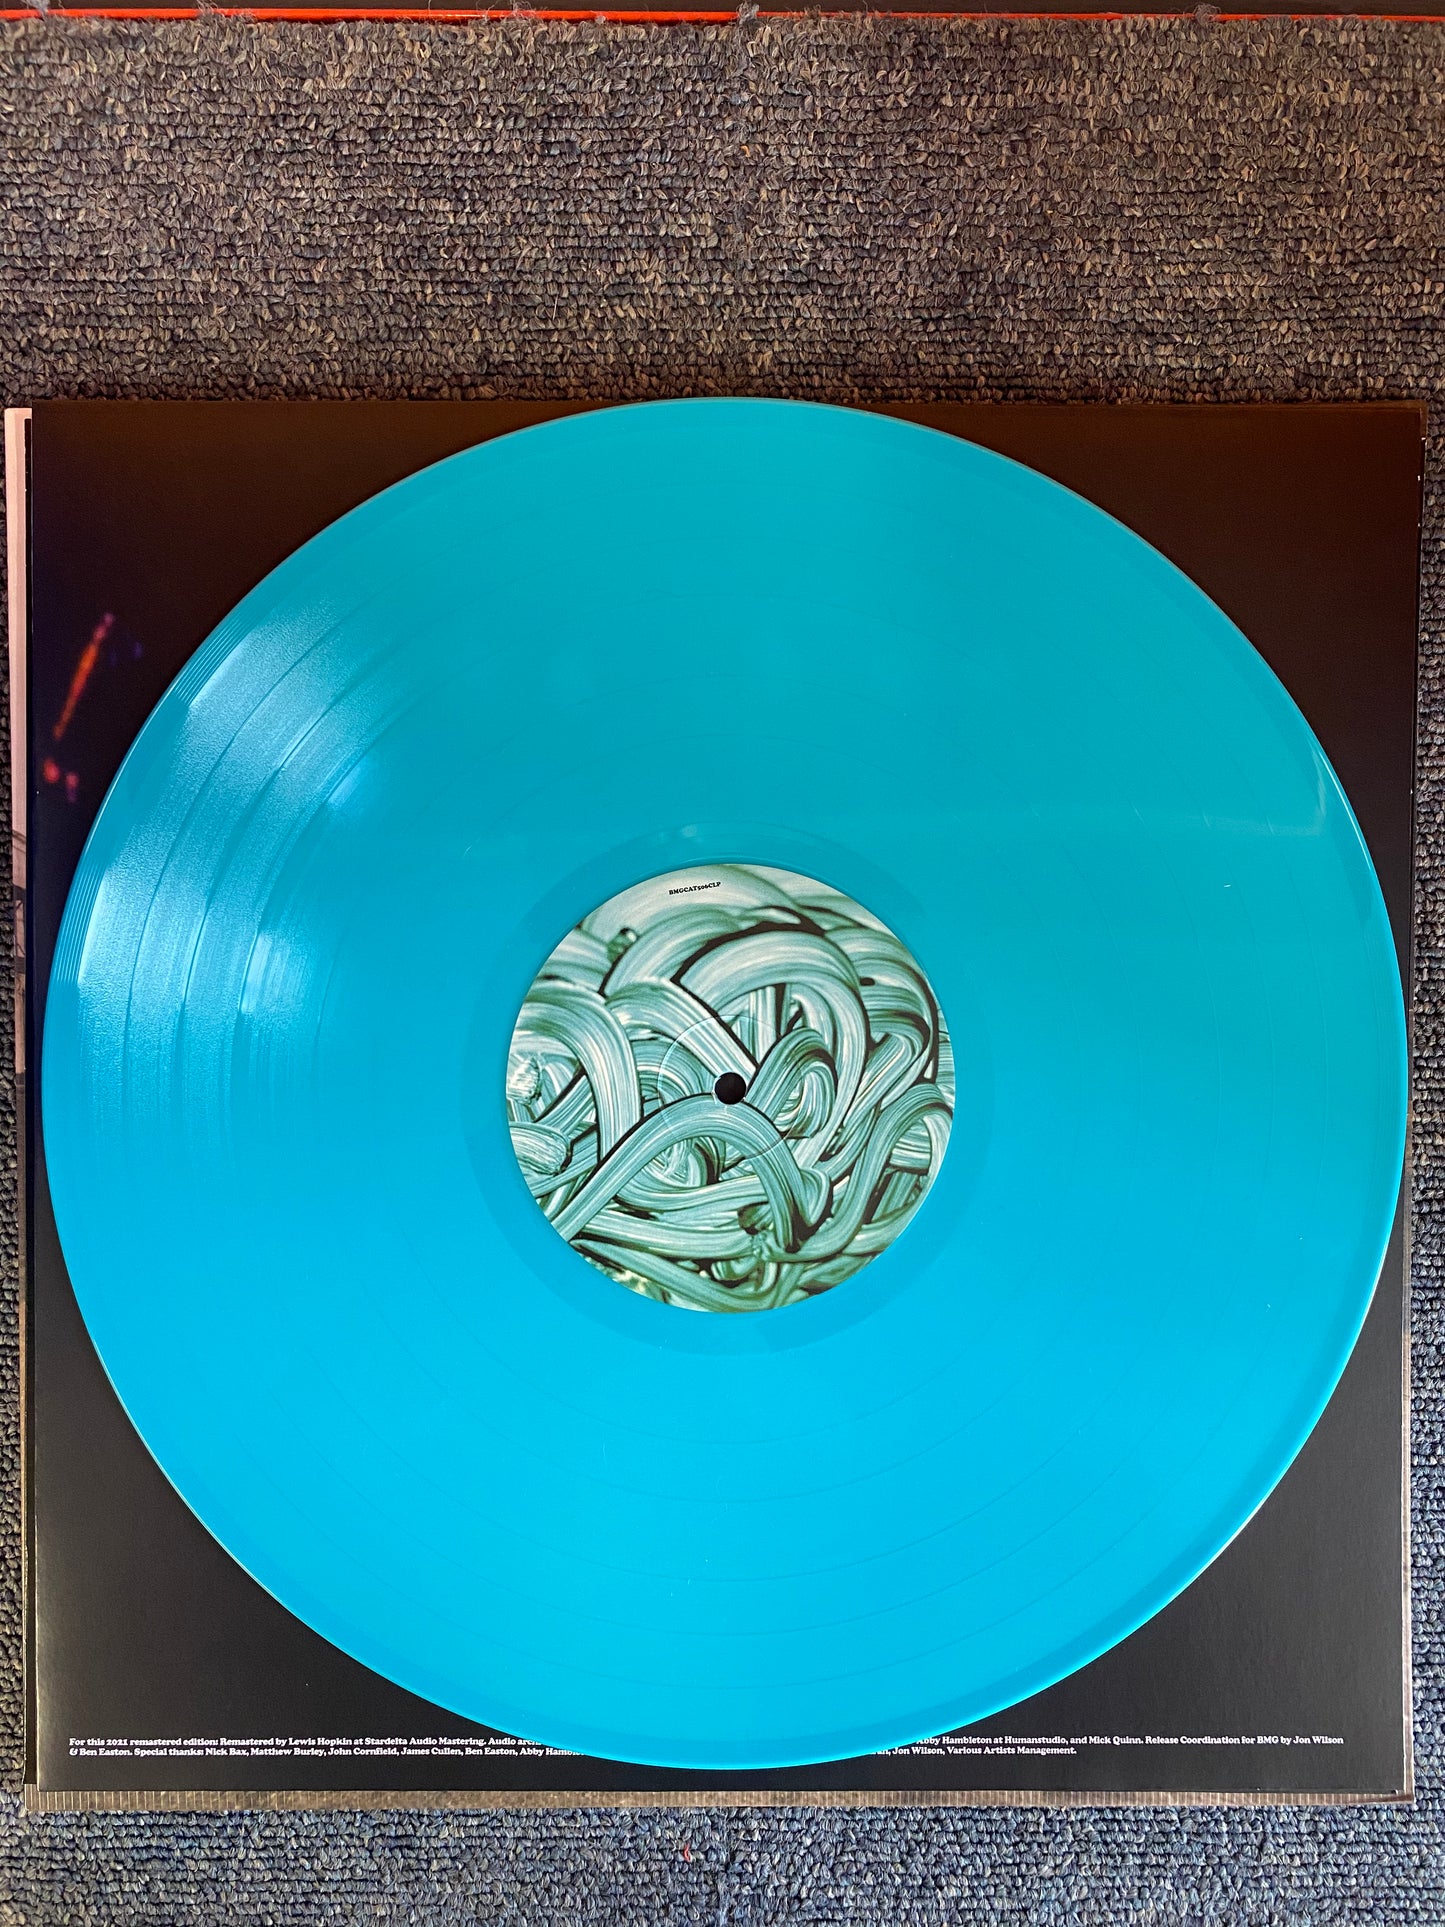 SUPERGRASS: IN IT FOR THE MONEY 2LP TURQUOISE VINYL RECORD (27.08.21)